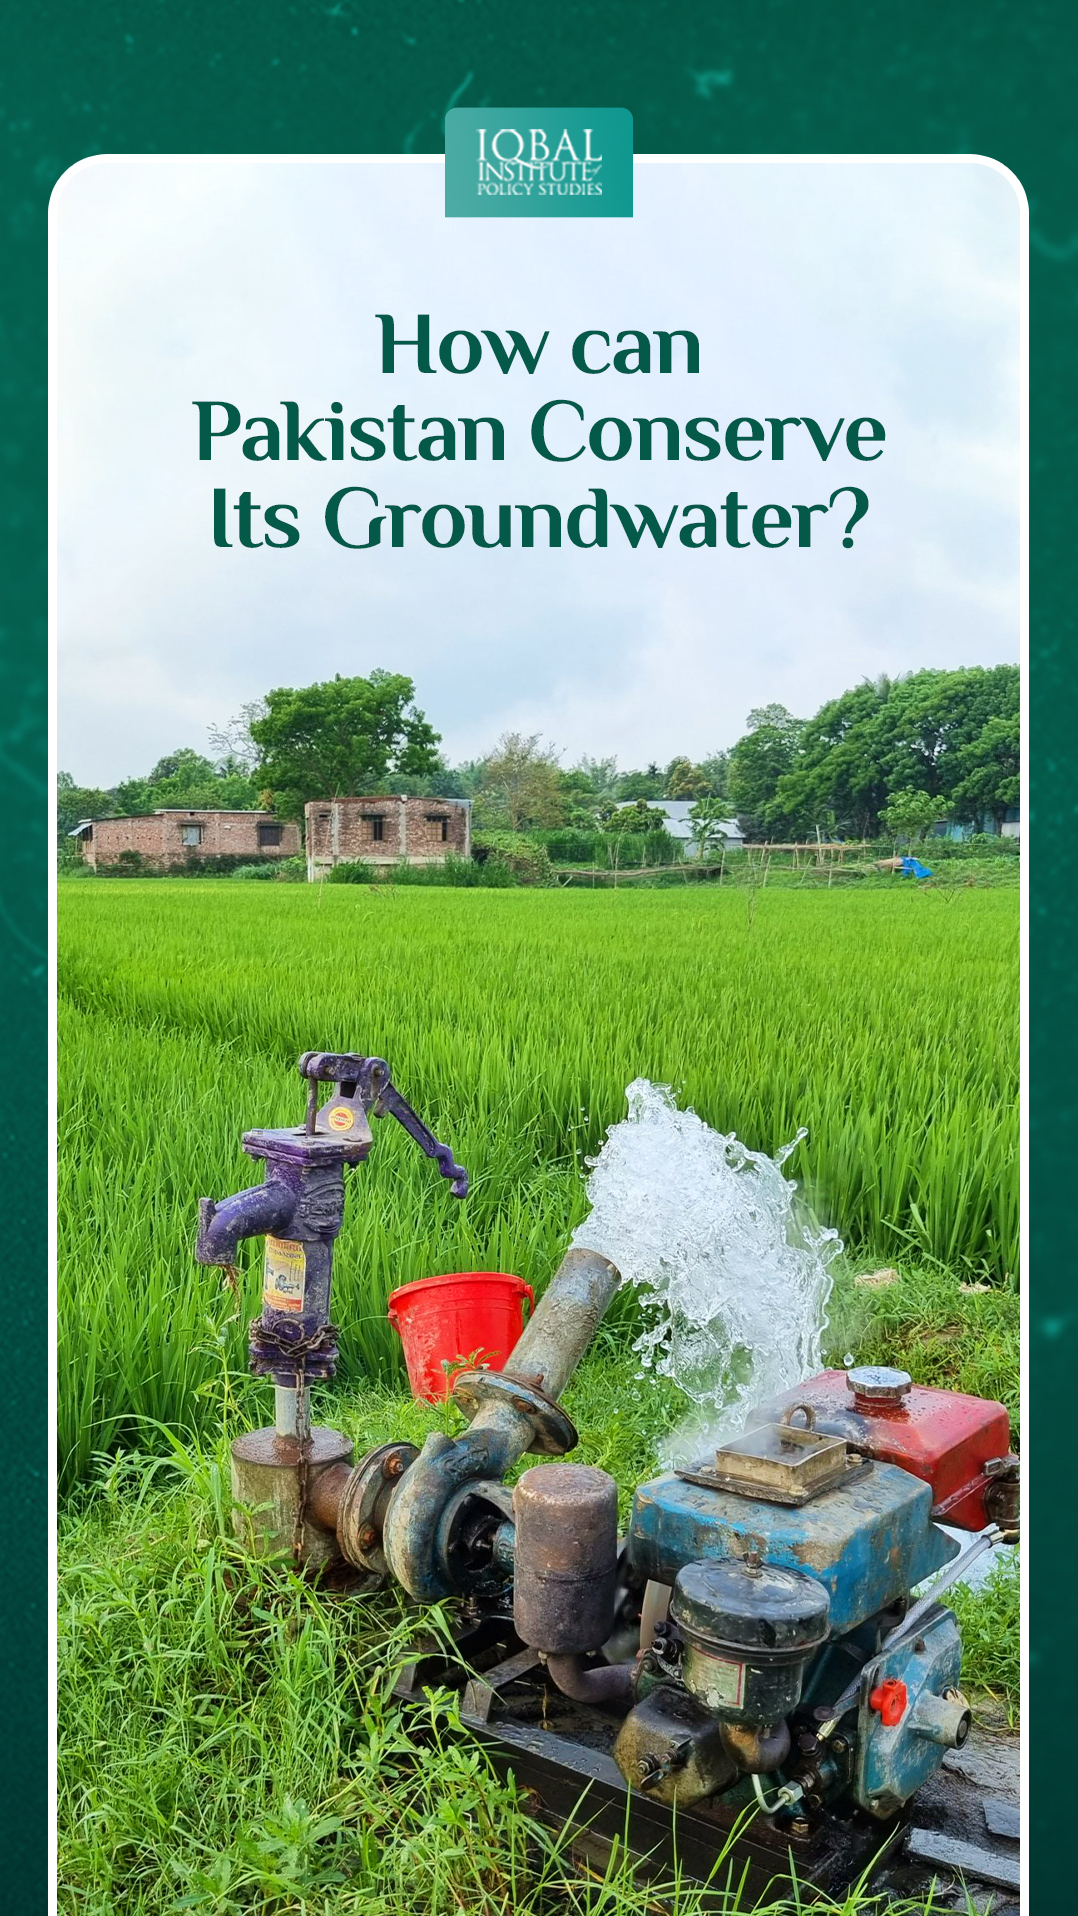 how can Pakistan conserve its groundwater?